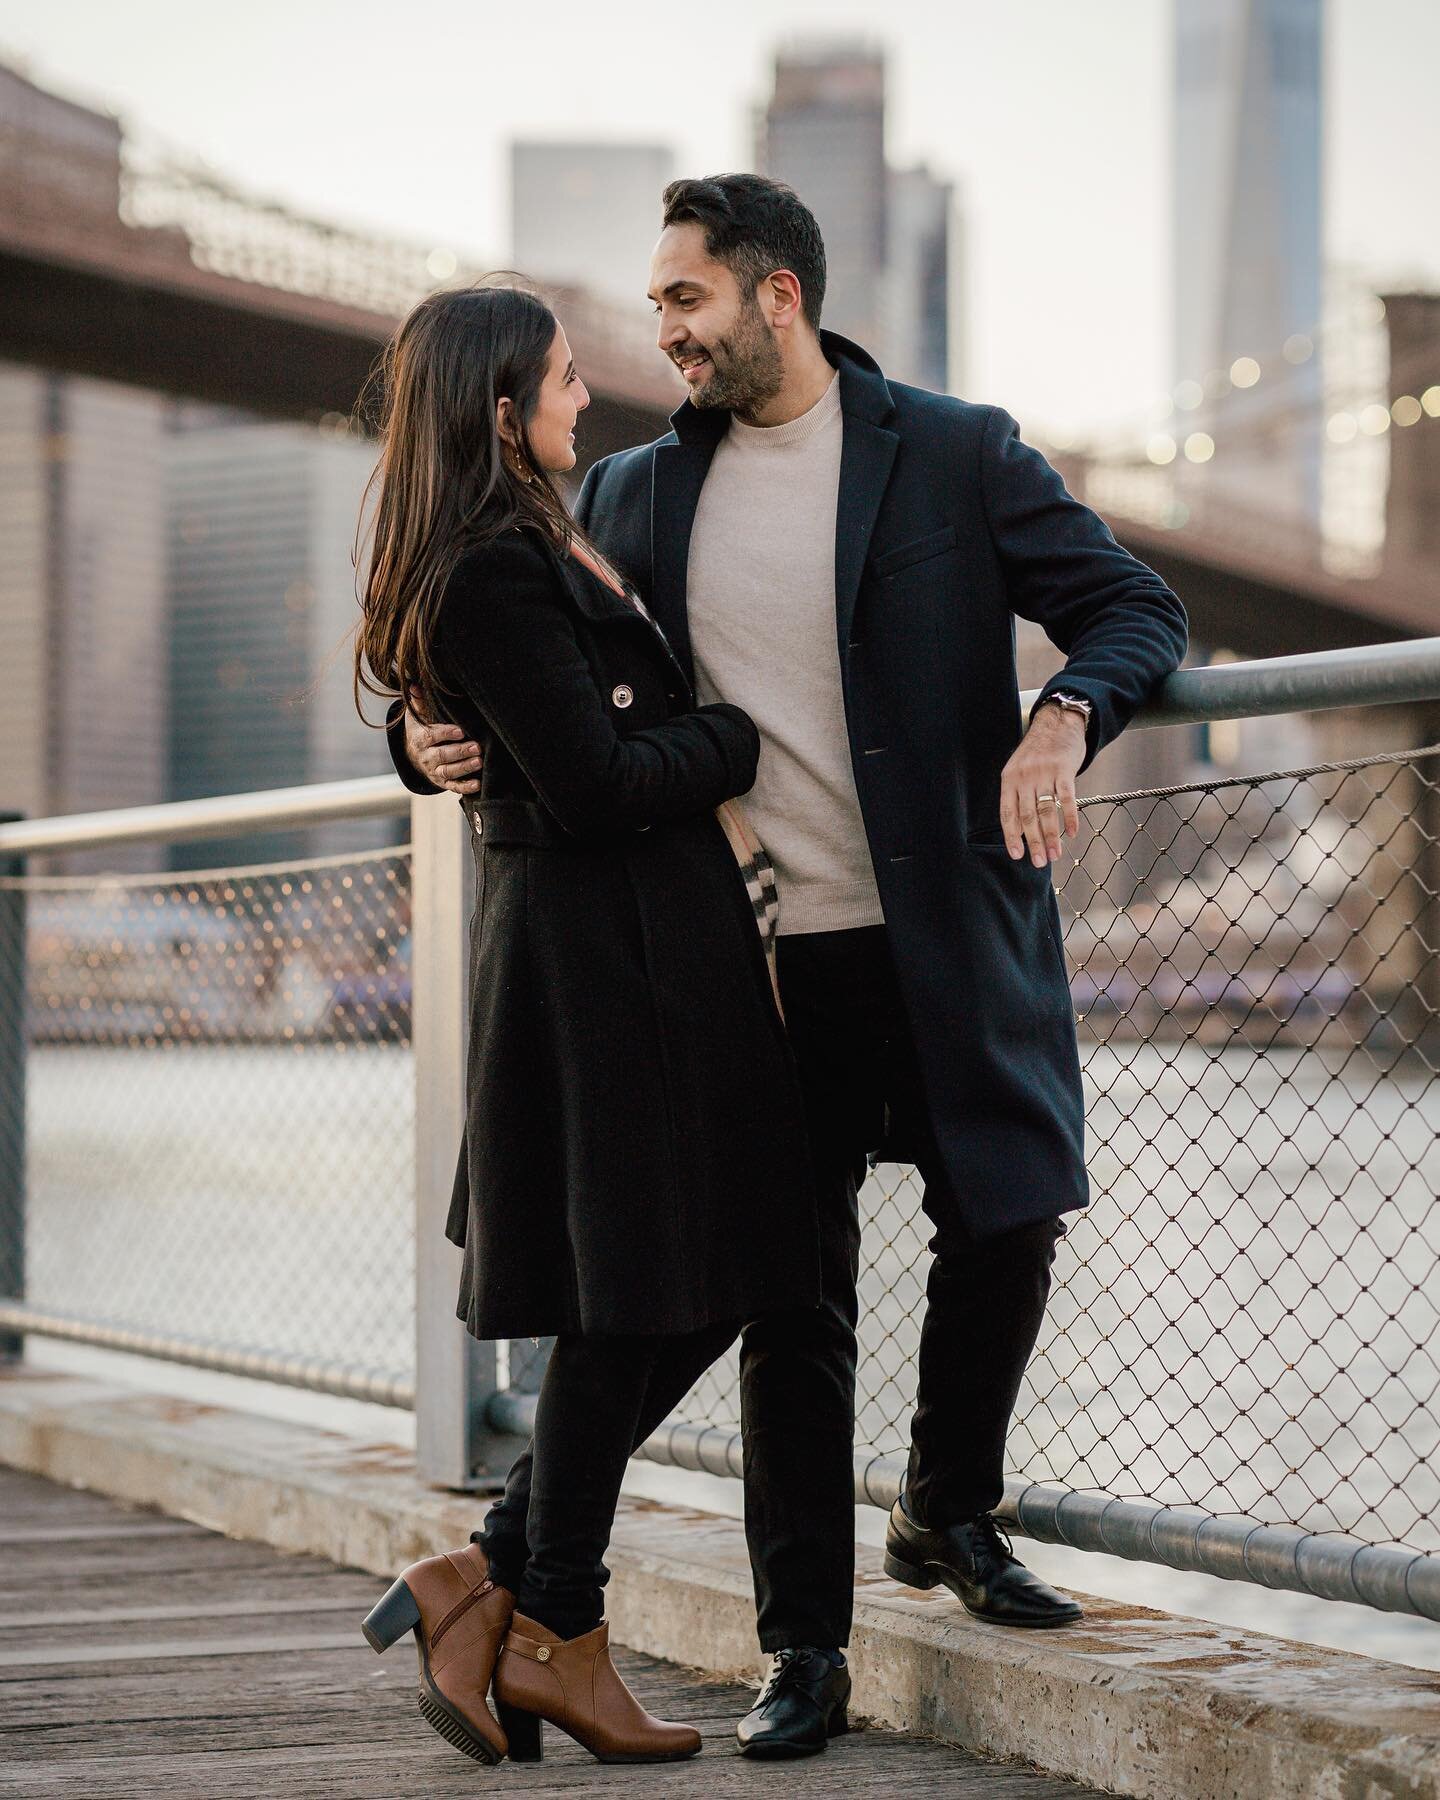 The last shoot we had in the freezing NY winter months! What a beautiful couple! Can&rsquo;t even tell they are freezing when you&rsquo;re so in love! 😍